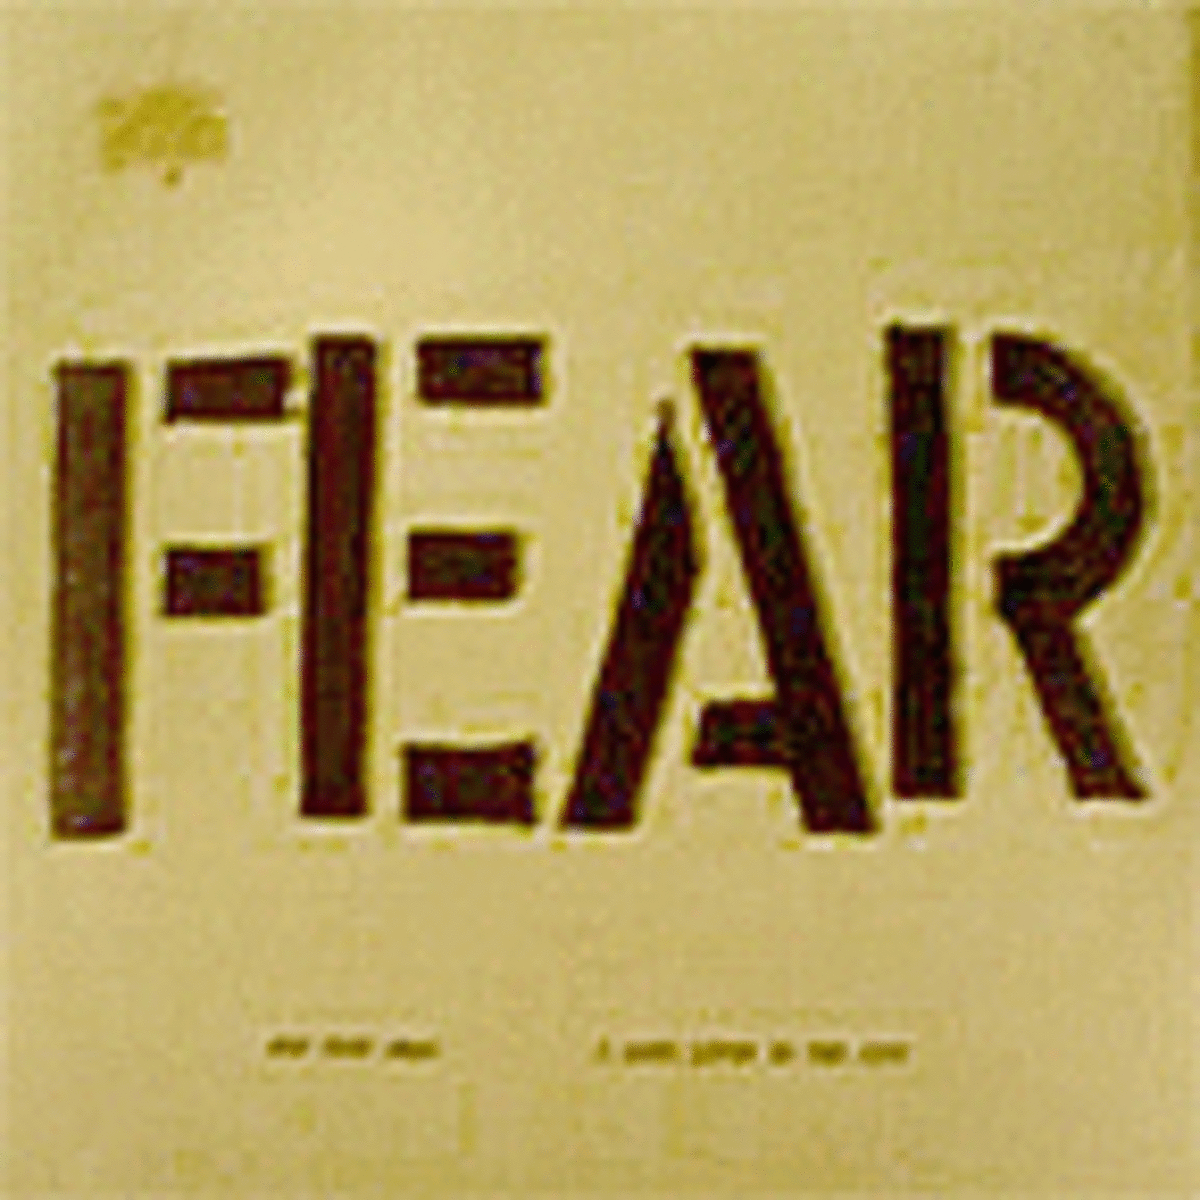  "I Love Livin' in the City," FEAR's first single, was originally released in 1978 on the Los Angeles-based Criminal Records.